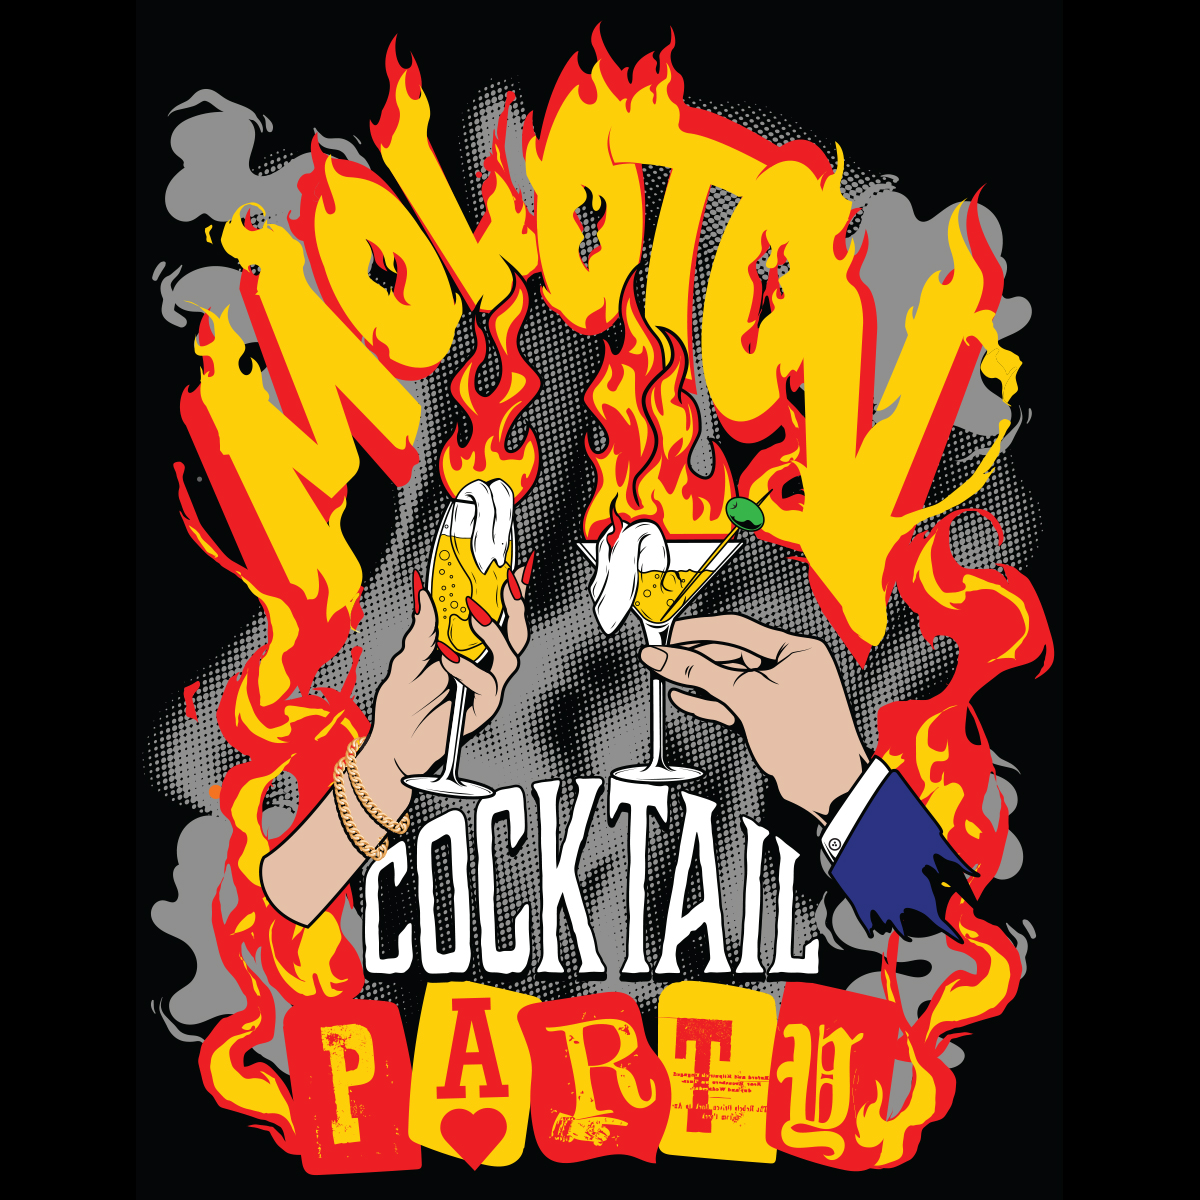 Molotov Cocktail Party